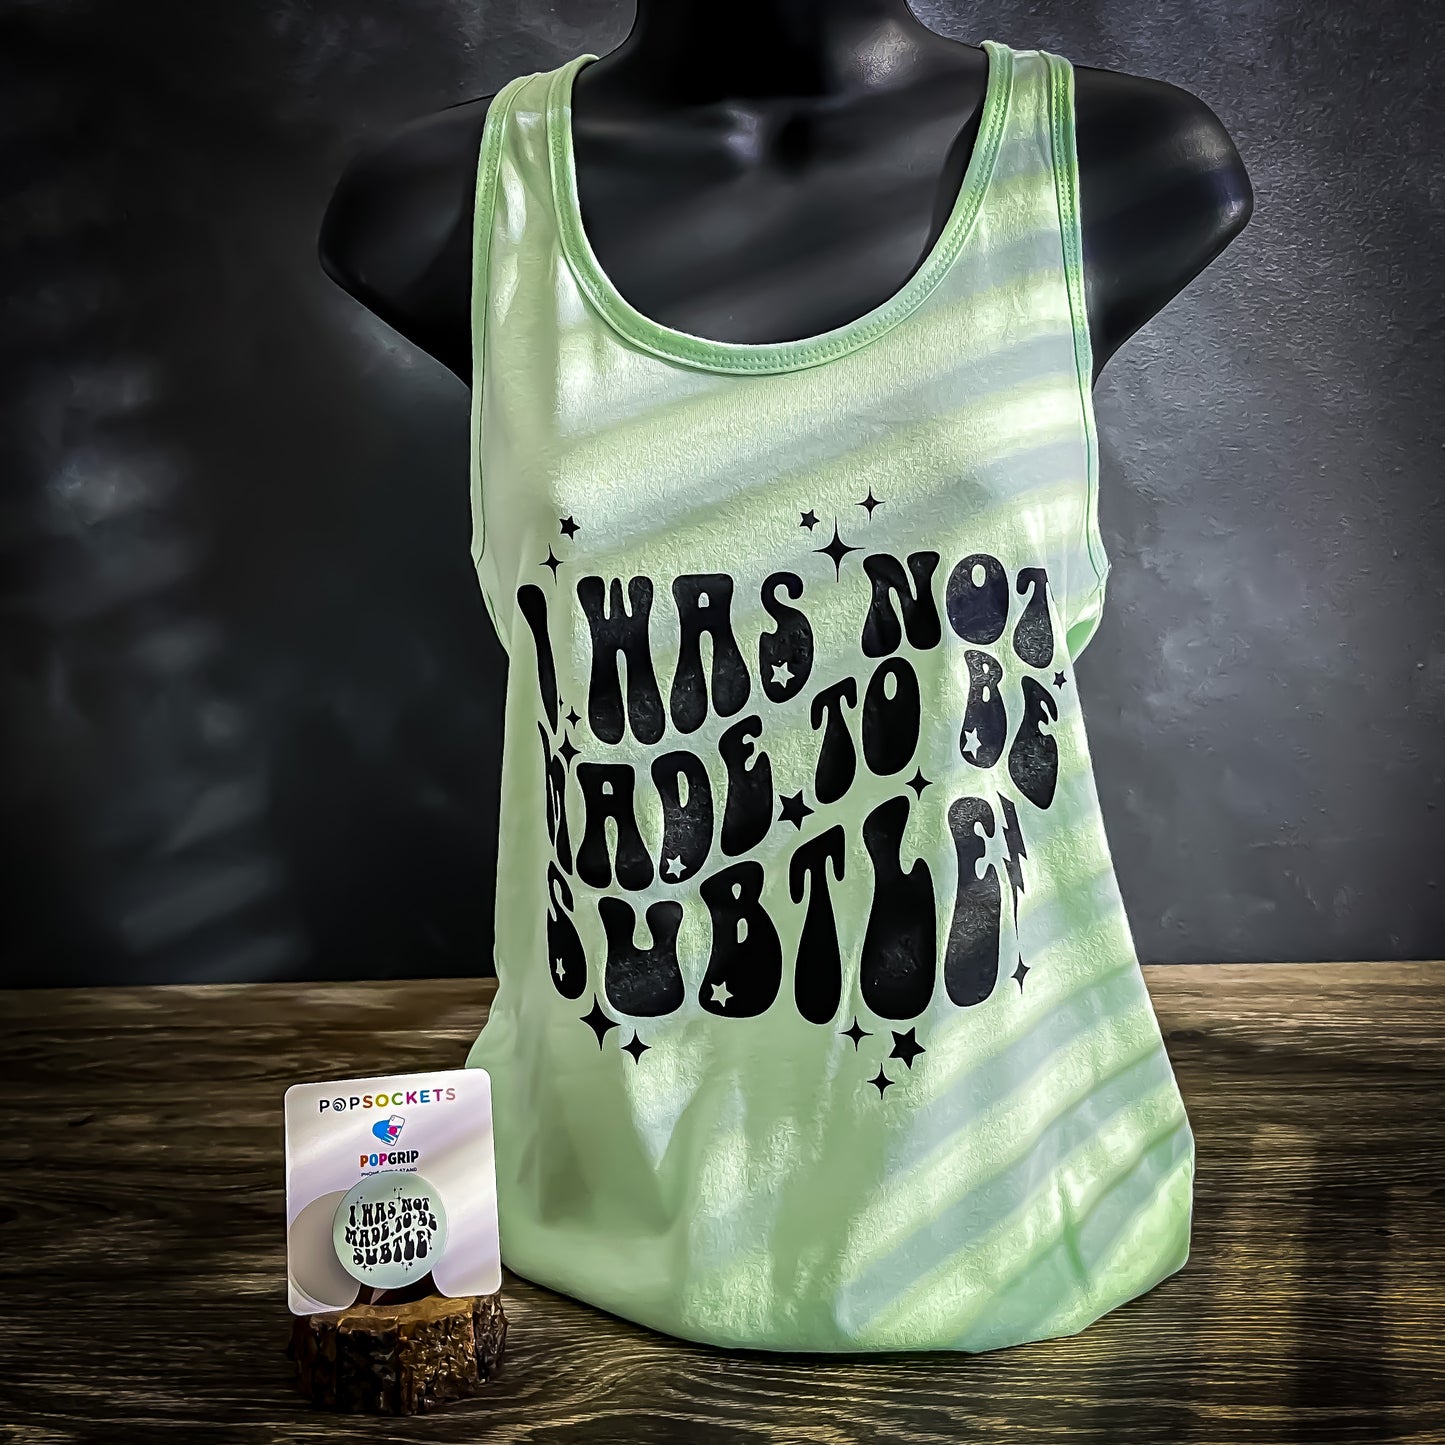 Ladies - "I Was Not Made To Be Subtle" Tank Top And Pop Socket